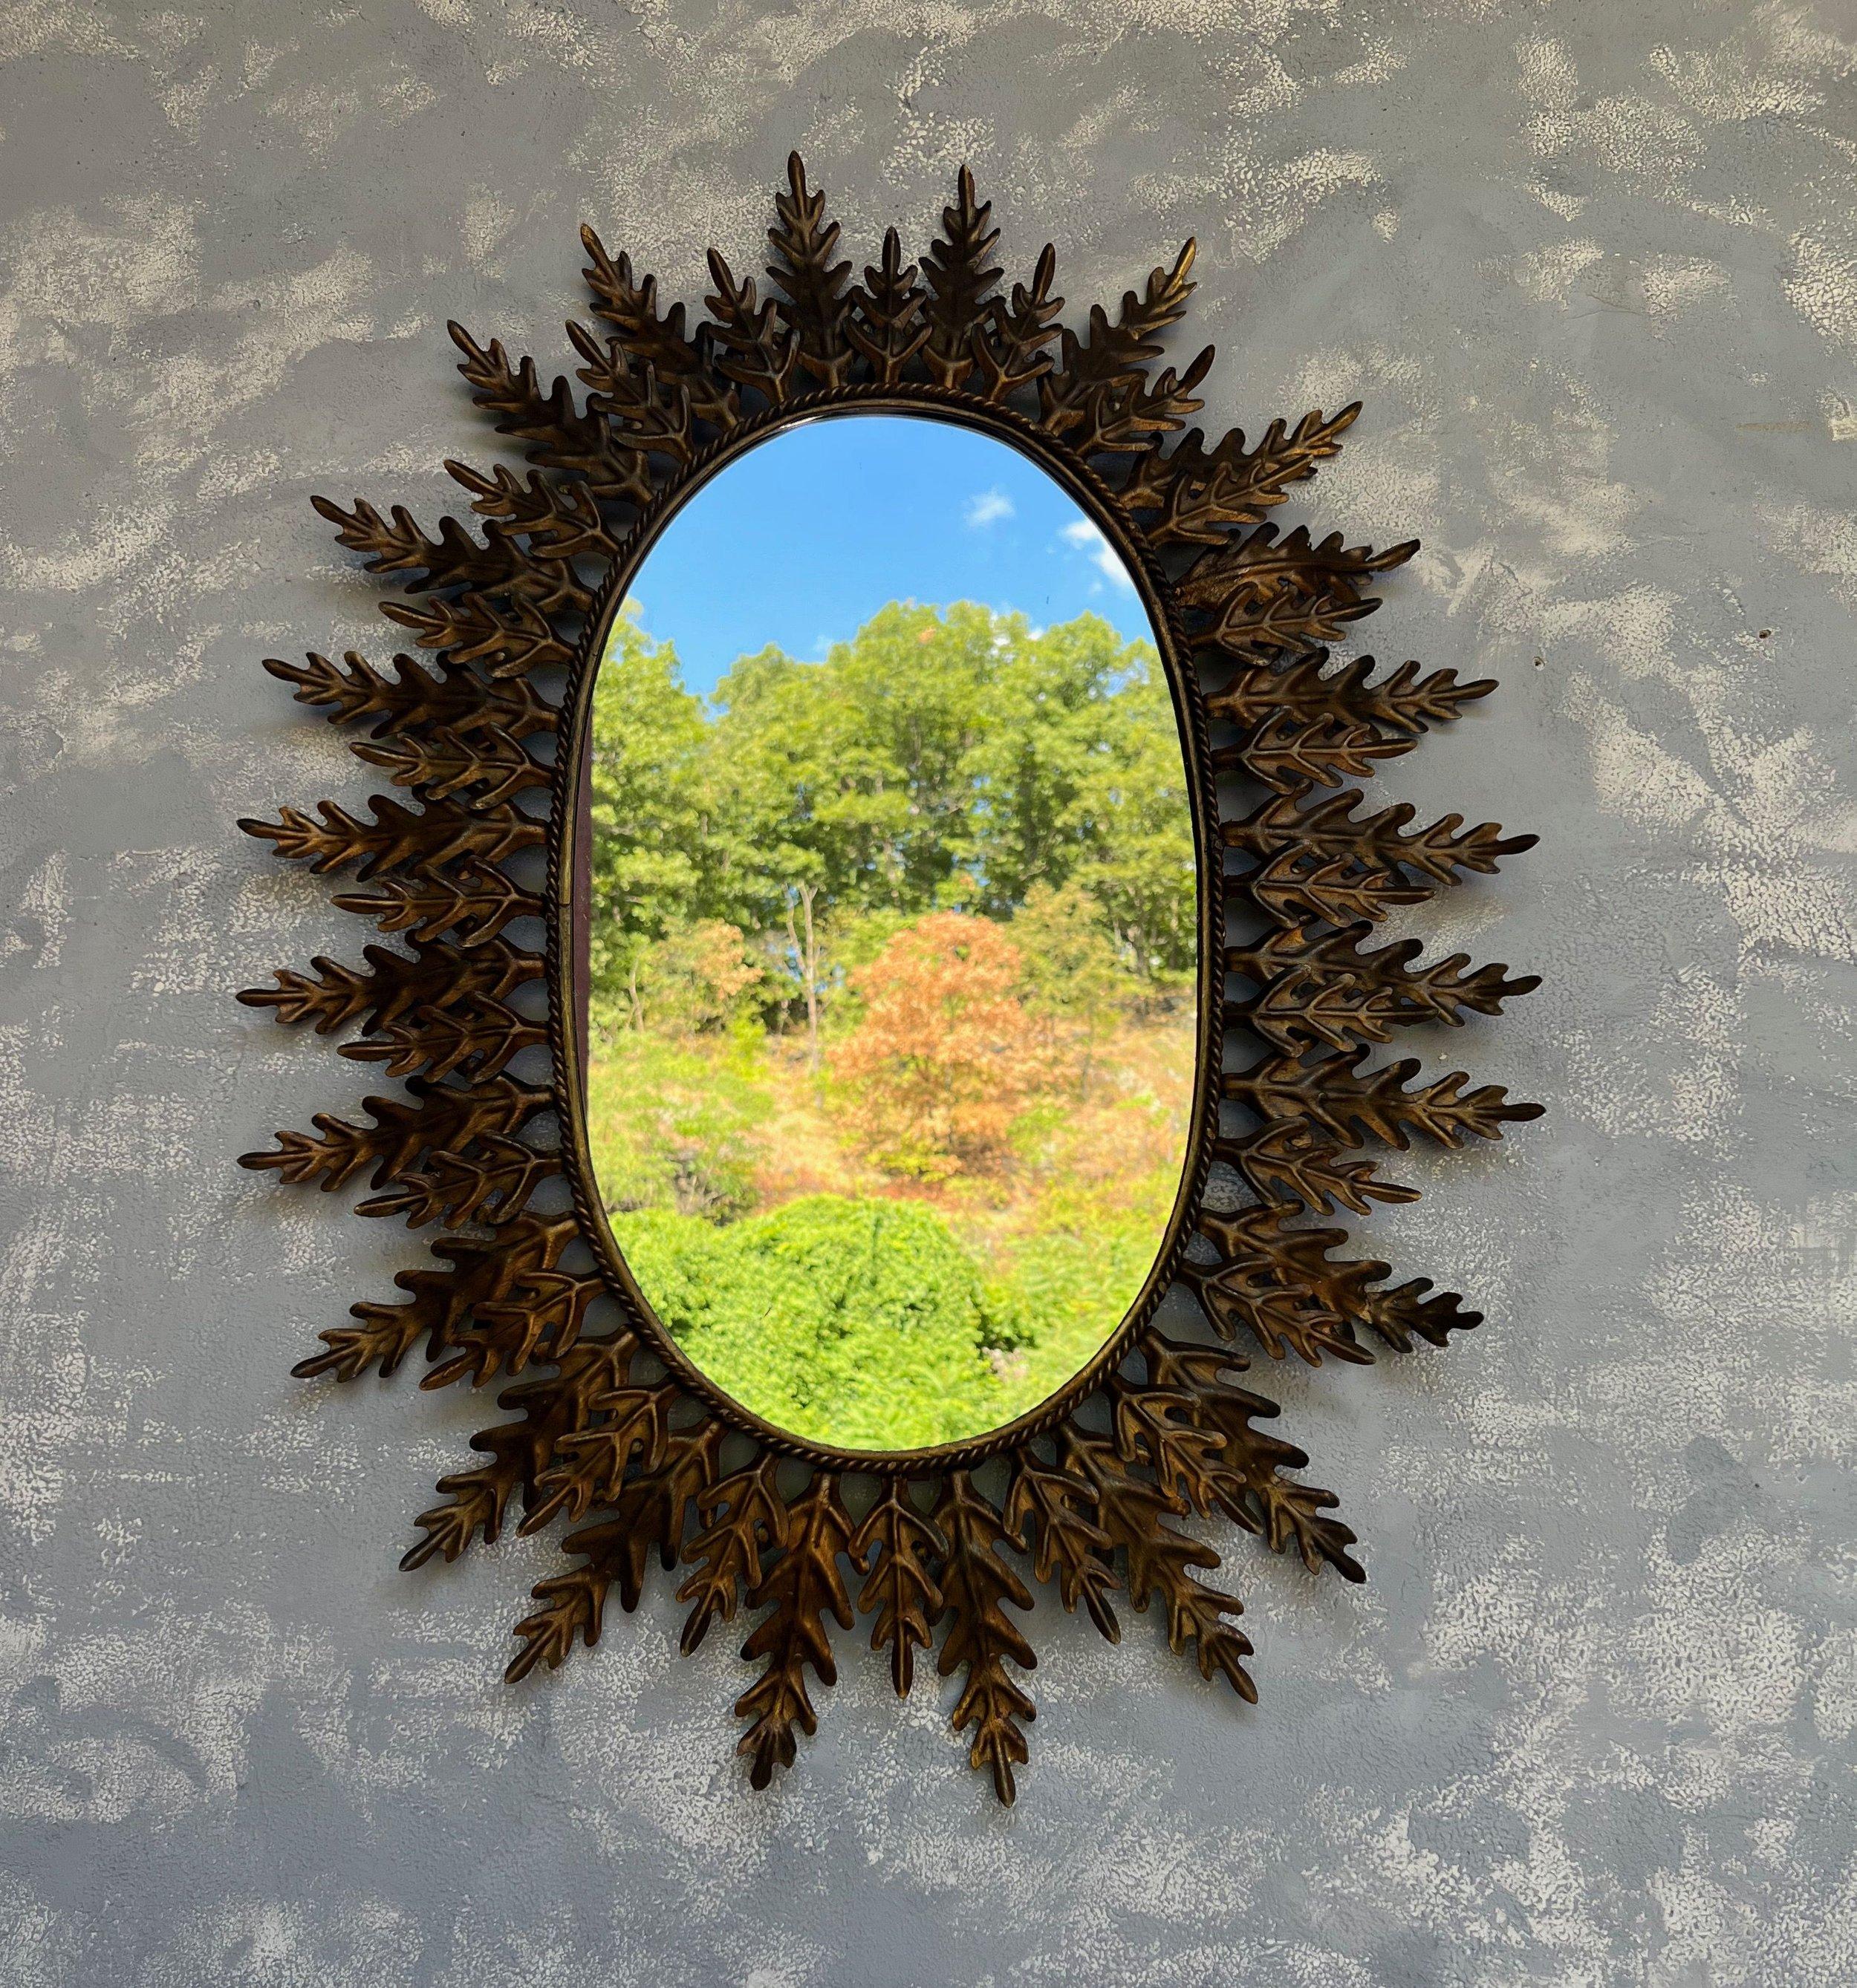 This exceptional oval gilt metal sunburst mirror possesses an air of sophistication and elegance. Crafted in Spain during the 1950s, it features alternating large and small leaves or rays surrounding a delicately braided frame. The evenly spaced